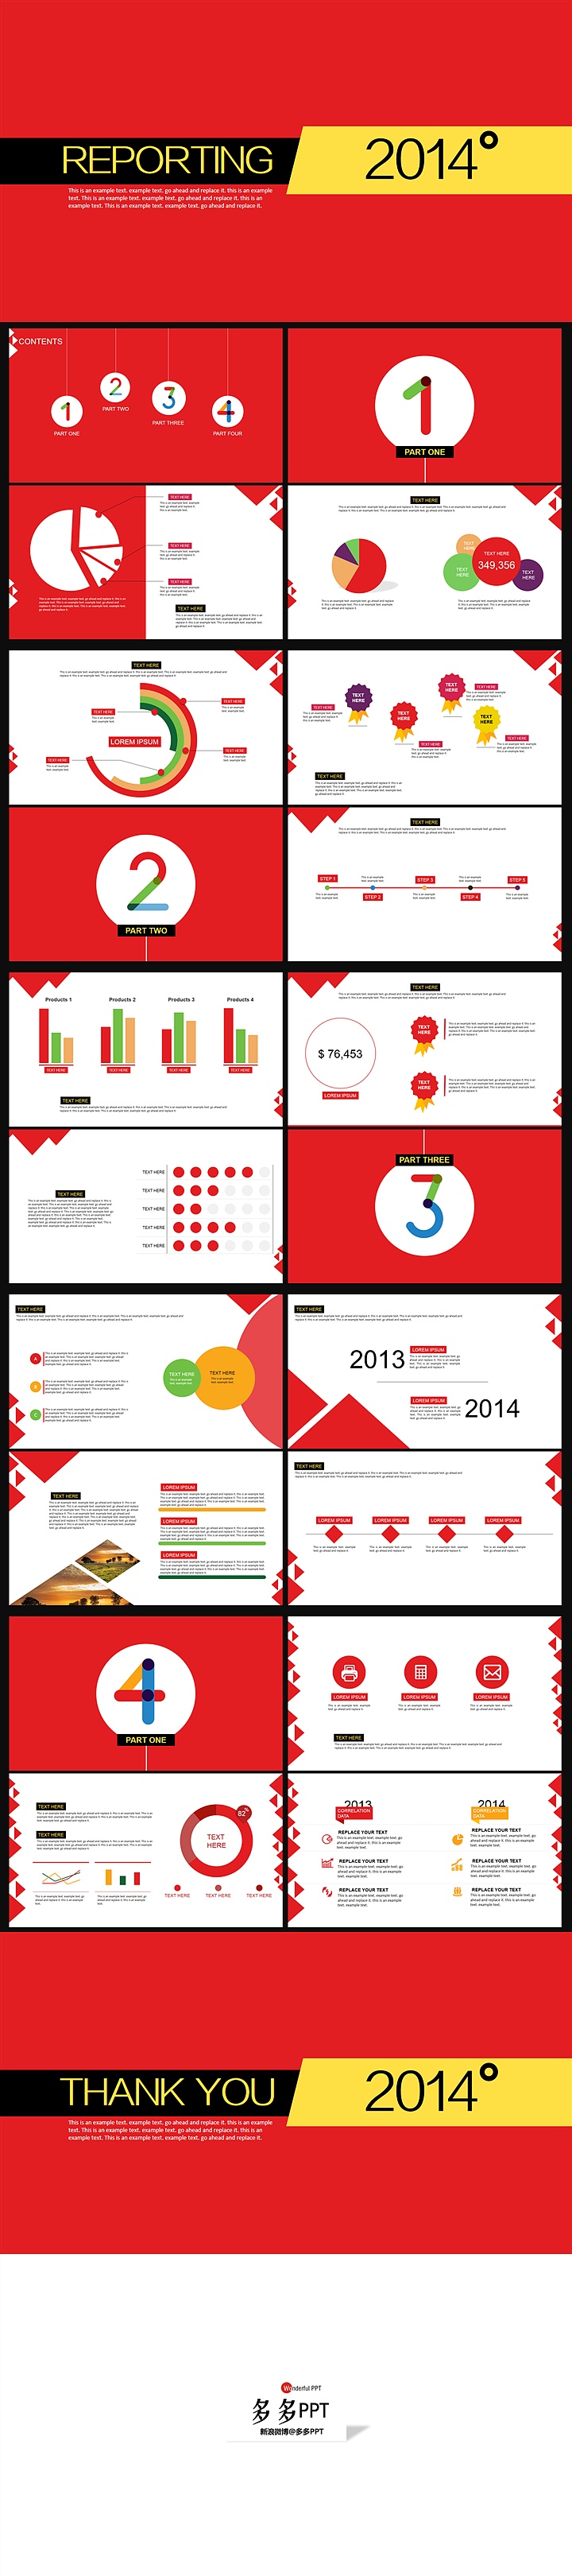 [Dynamic to Simple and Practical] New and simple 2014 mid-year summary infographic template (episode 14)